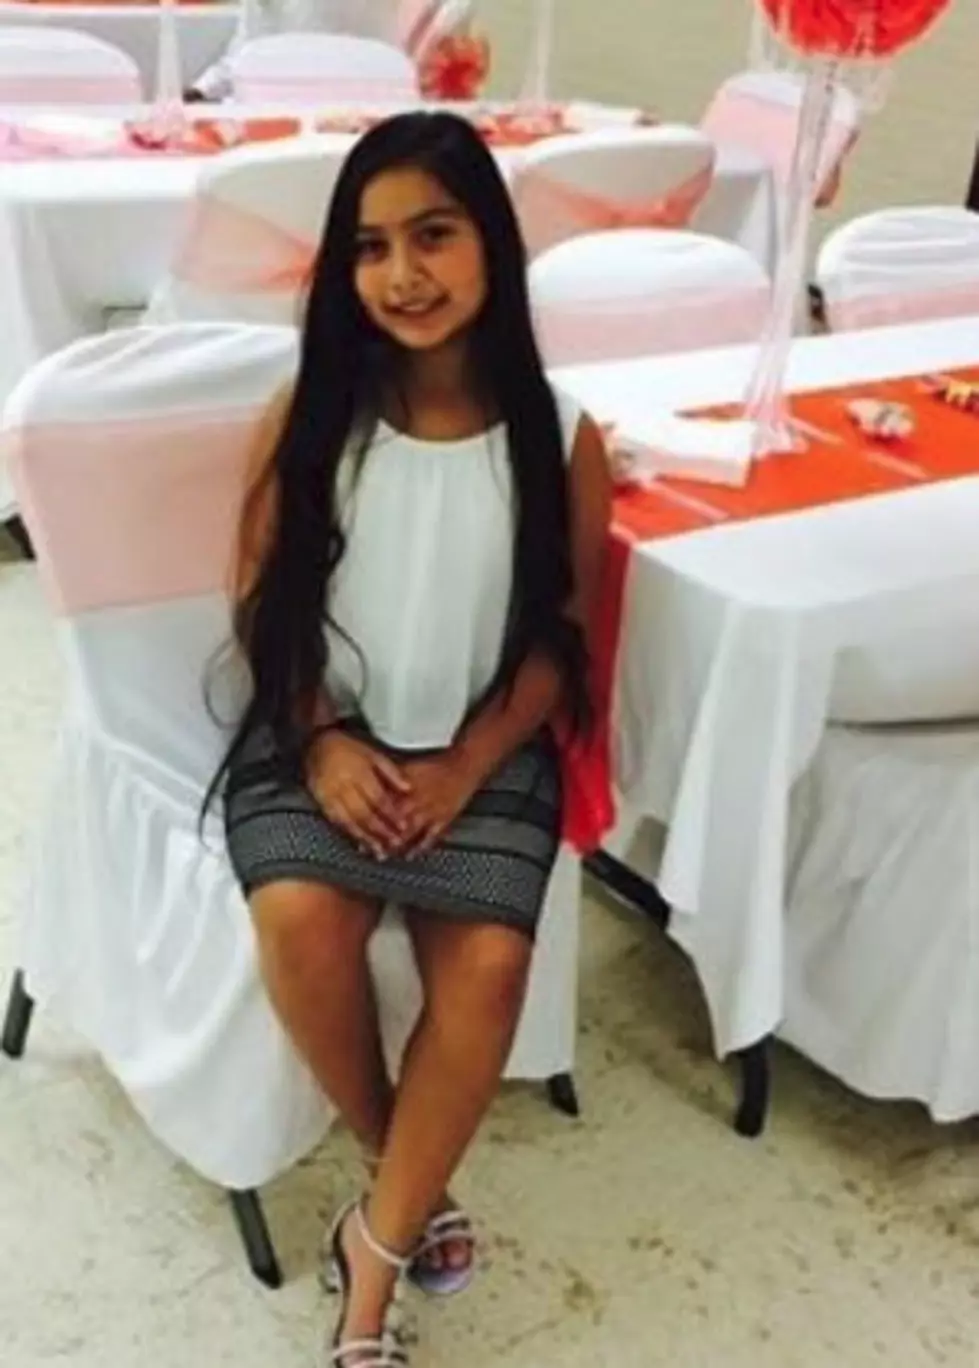 Reward Posted In Case Of Missing 10 Year Old East Texan Kayla Gomez-Orozco